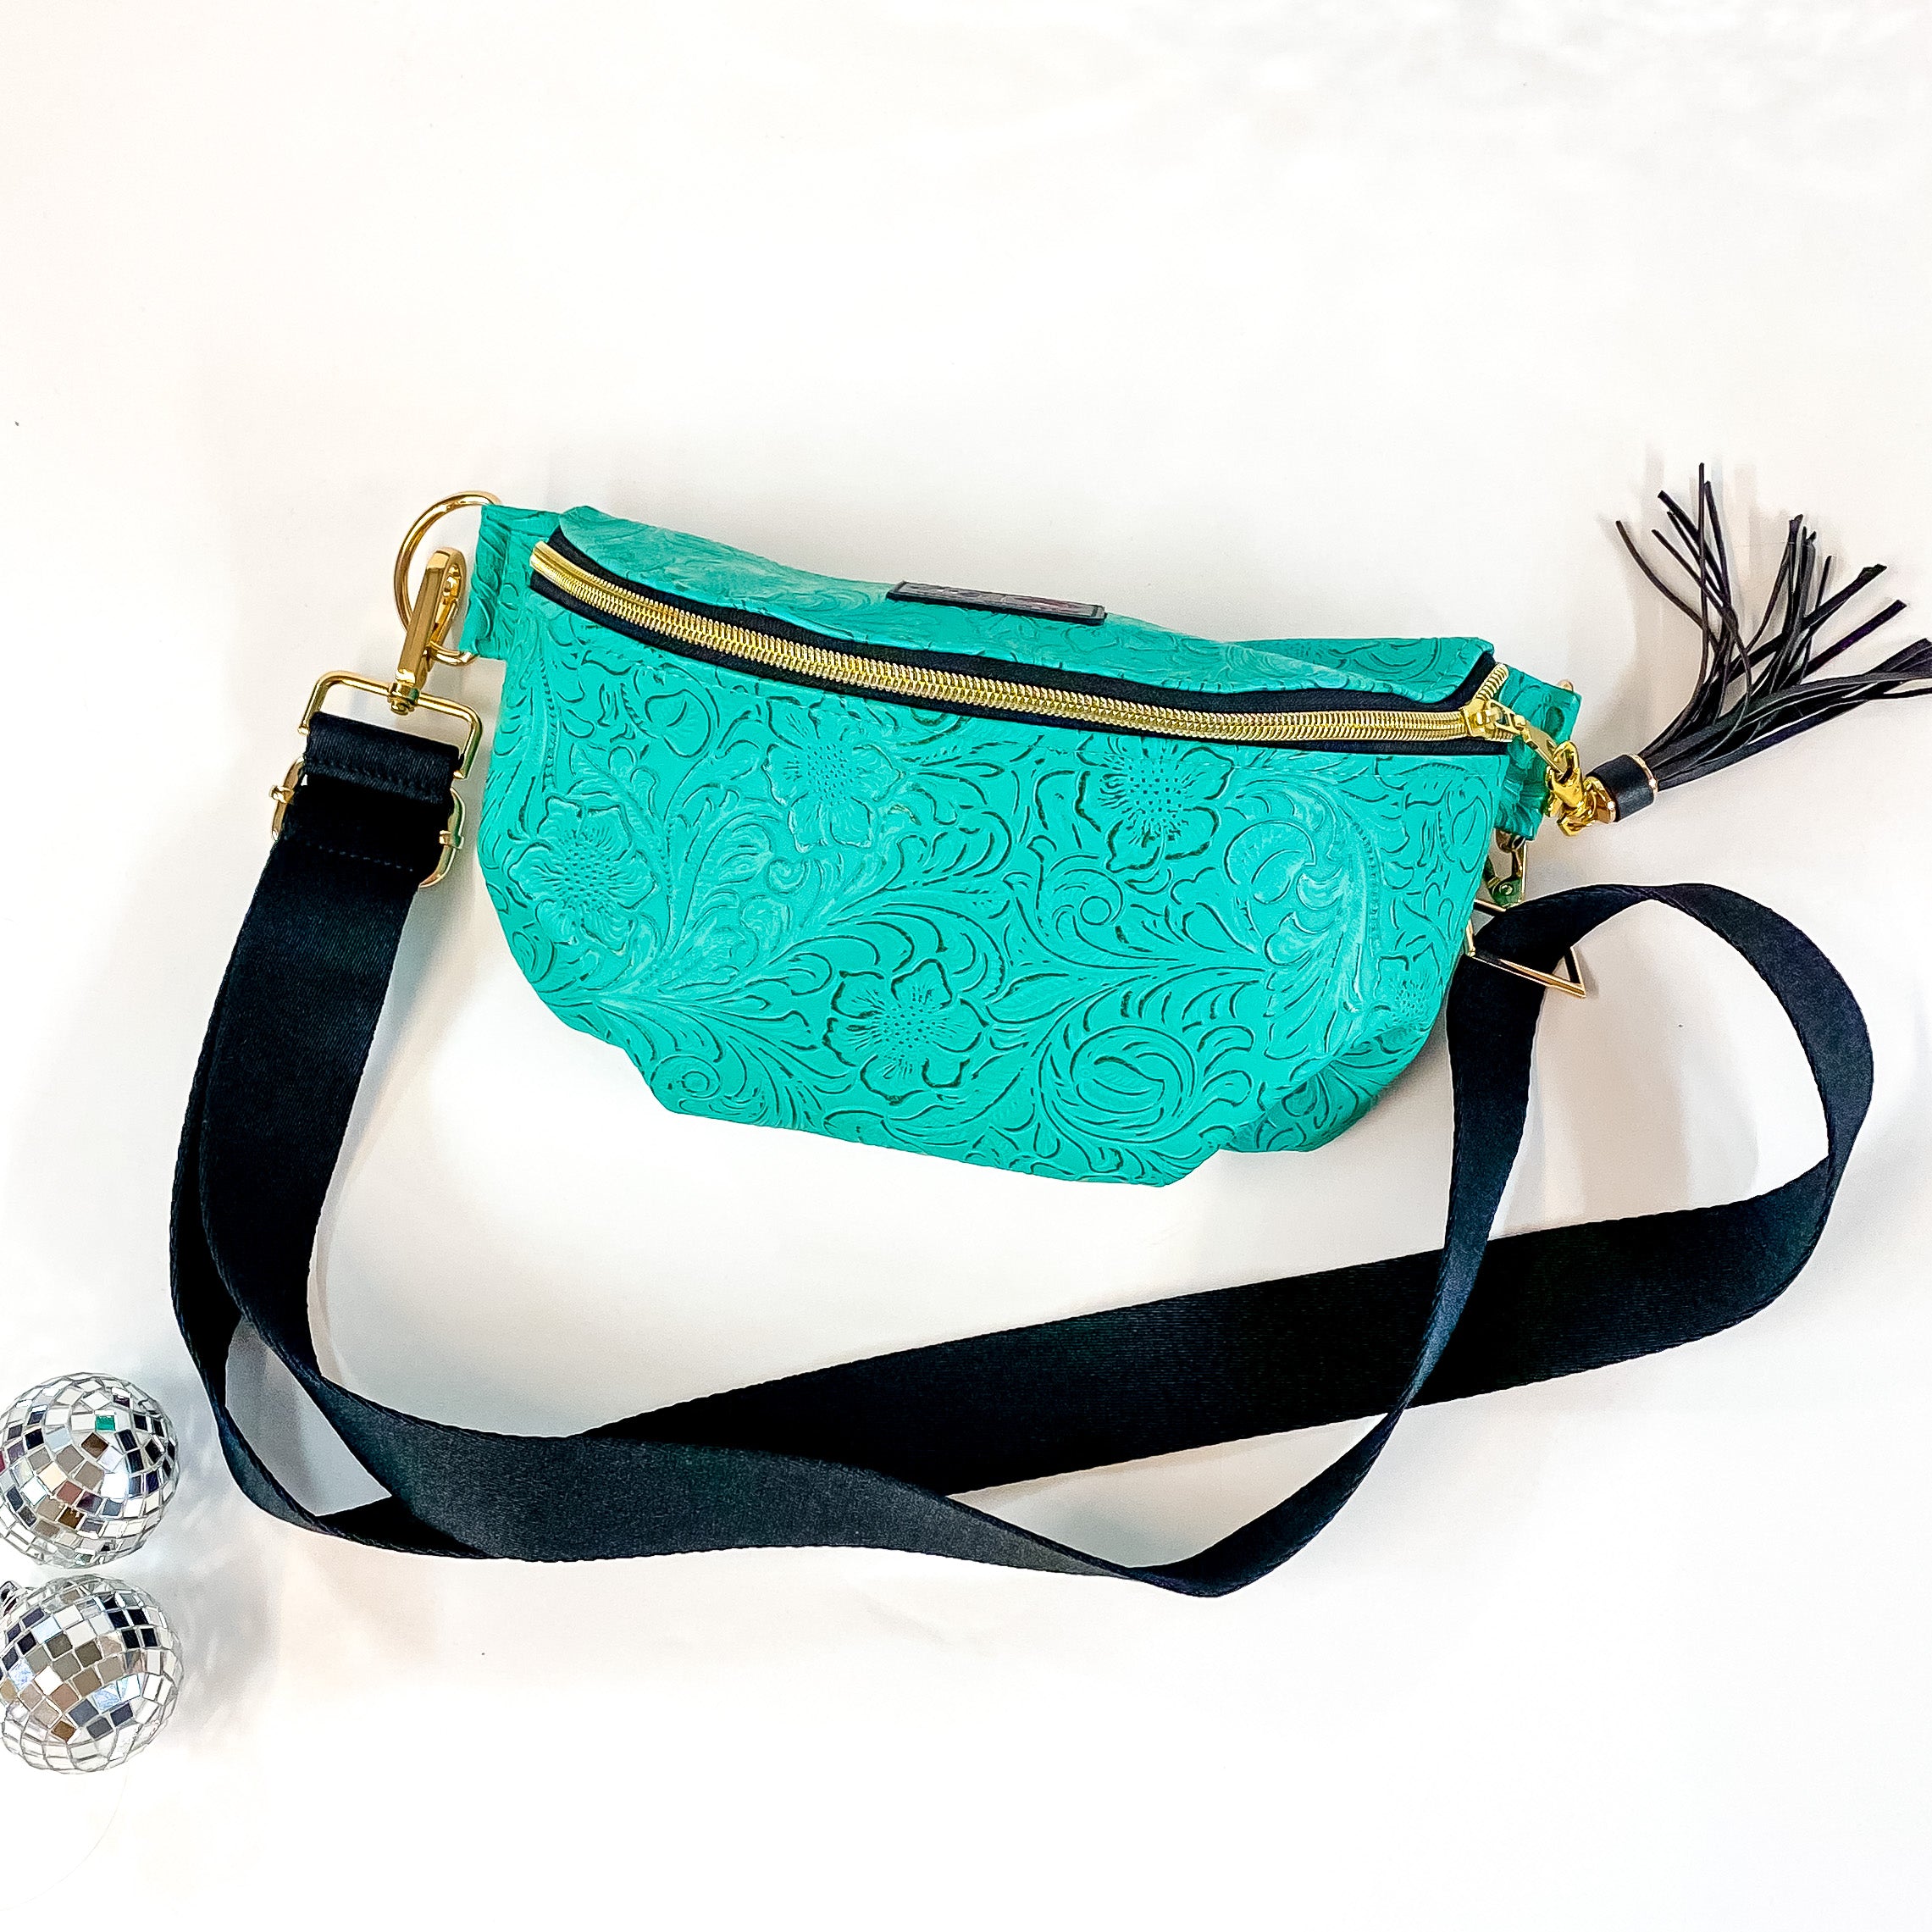 Makeup Junkie | Turquoise Dream Sidekick with Back Zipper in Turquoise Green Tooled Print - Giddy Up Glamour Boutique